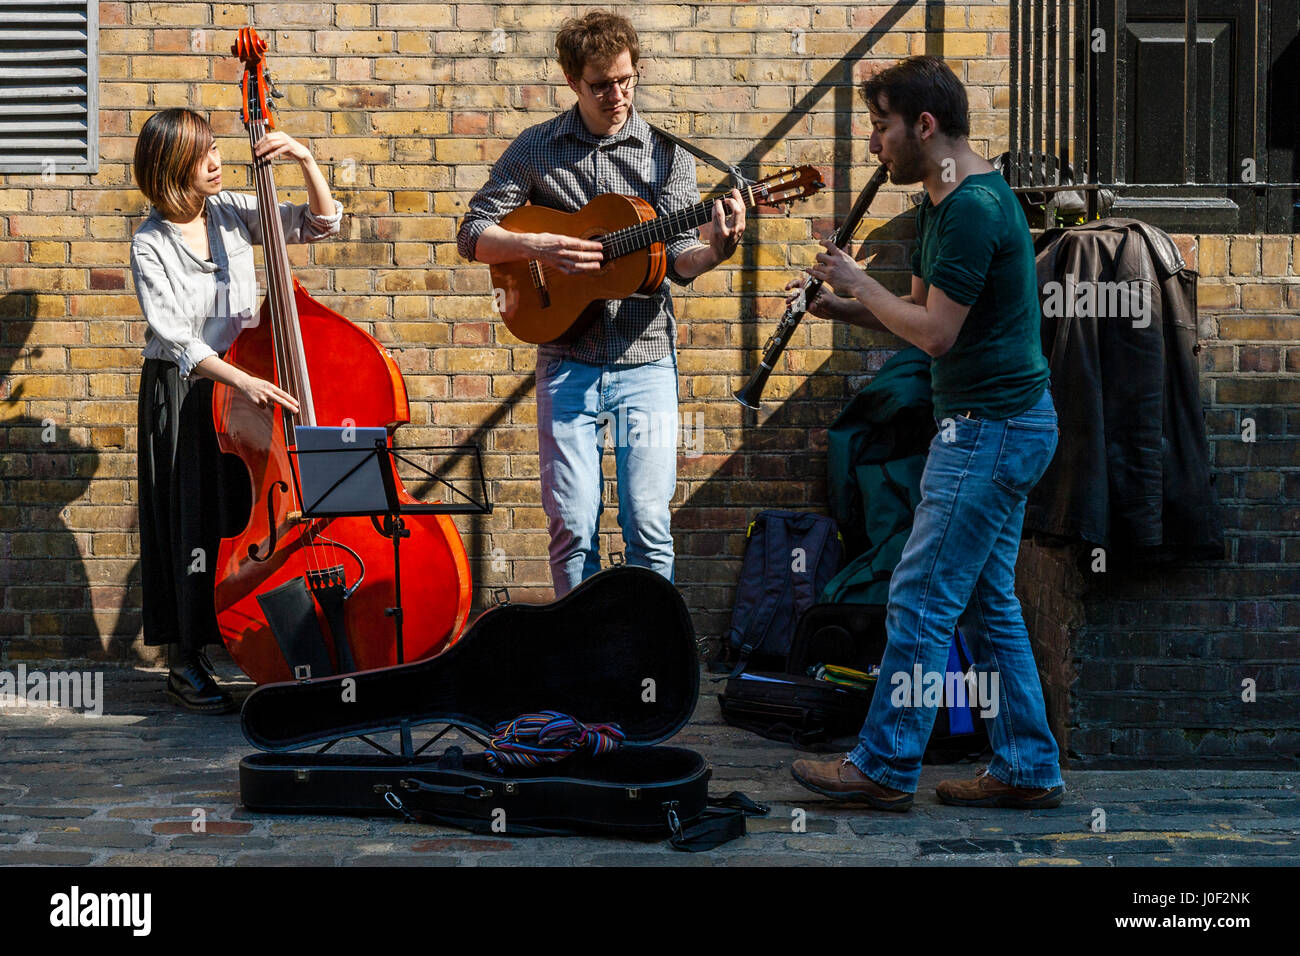 Young Musicians Playing In Brick Lane, London, England Stock Photo